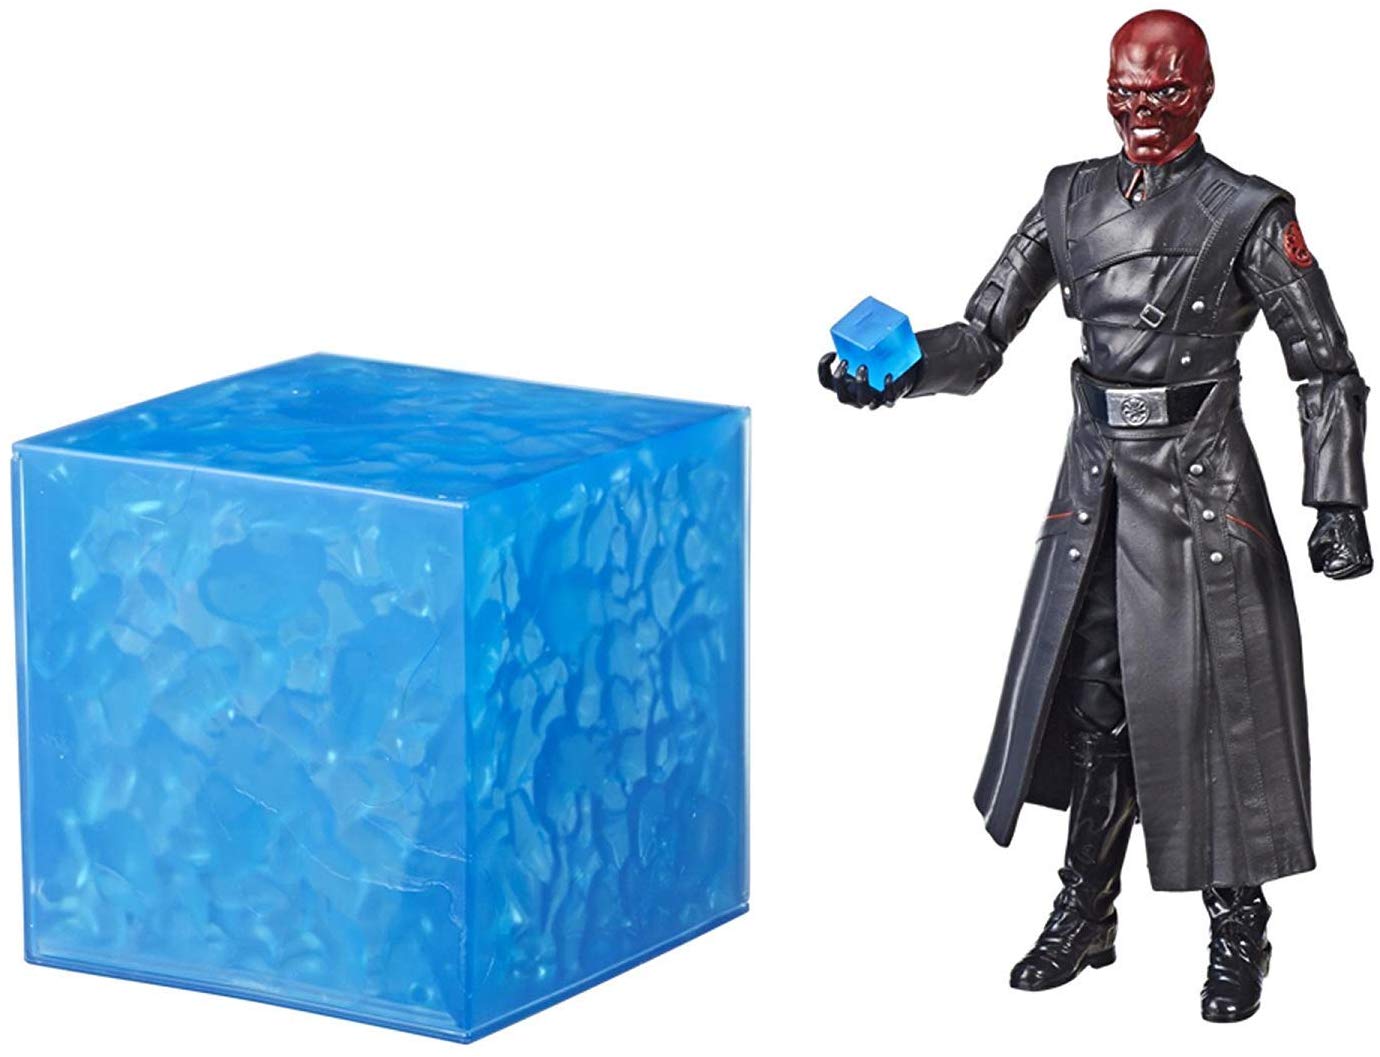 SDCC 2018 Hasbro Marvel Legends Series Red Skull and Electronic Tesseract Action Figure Set 2